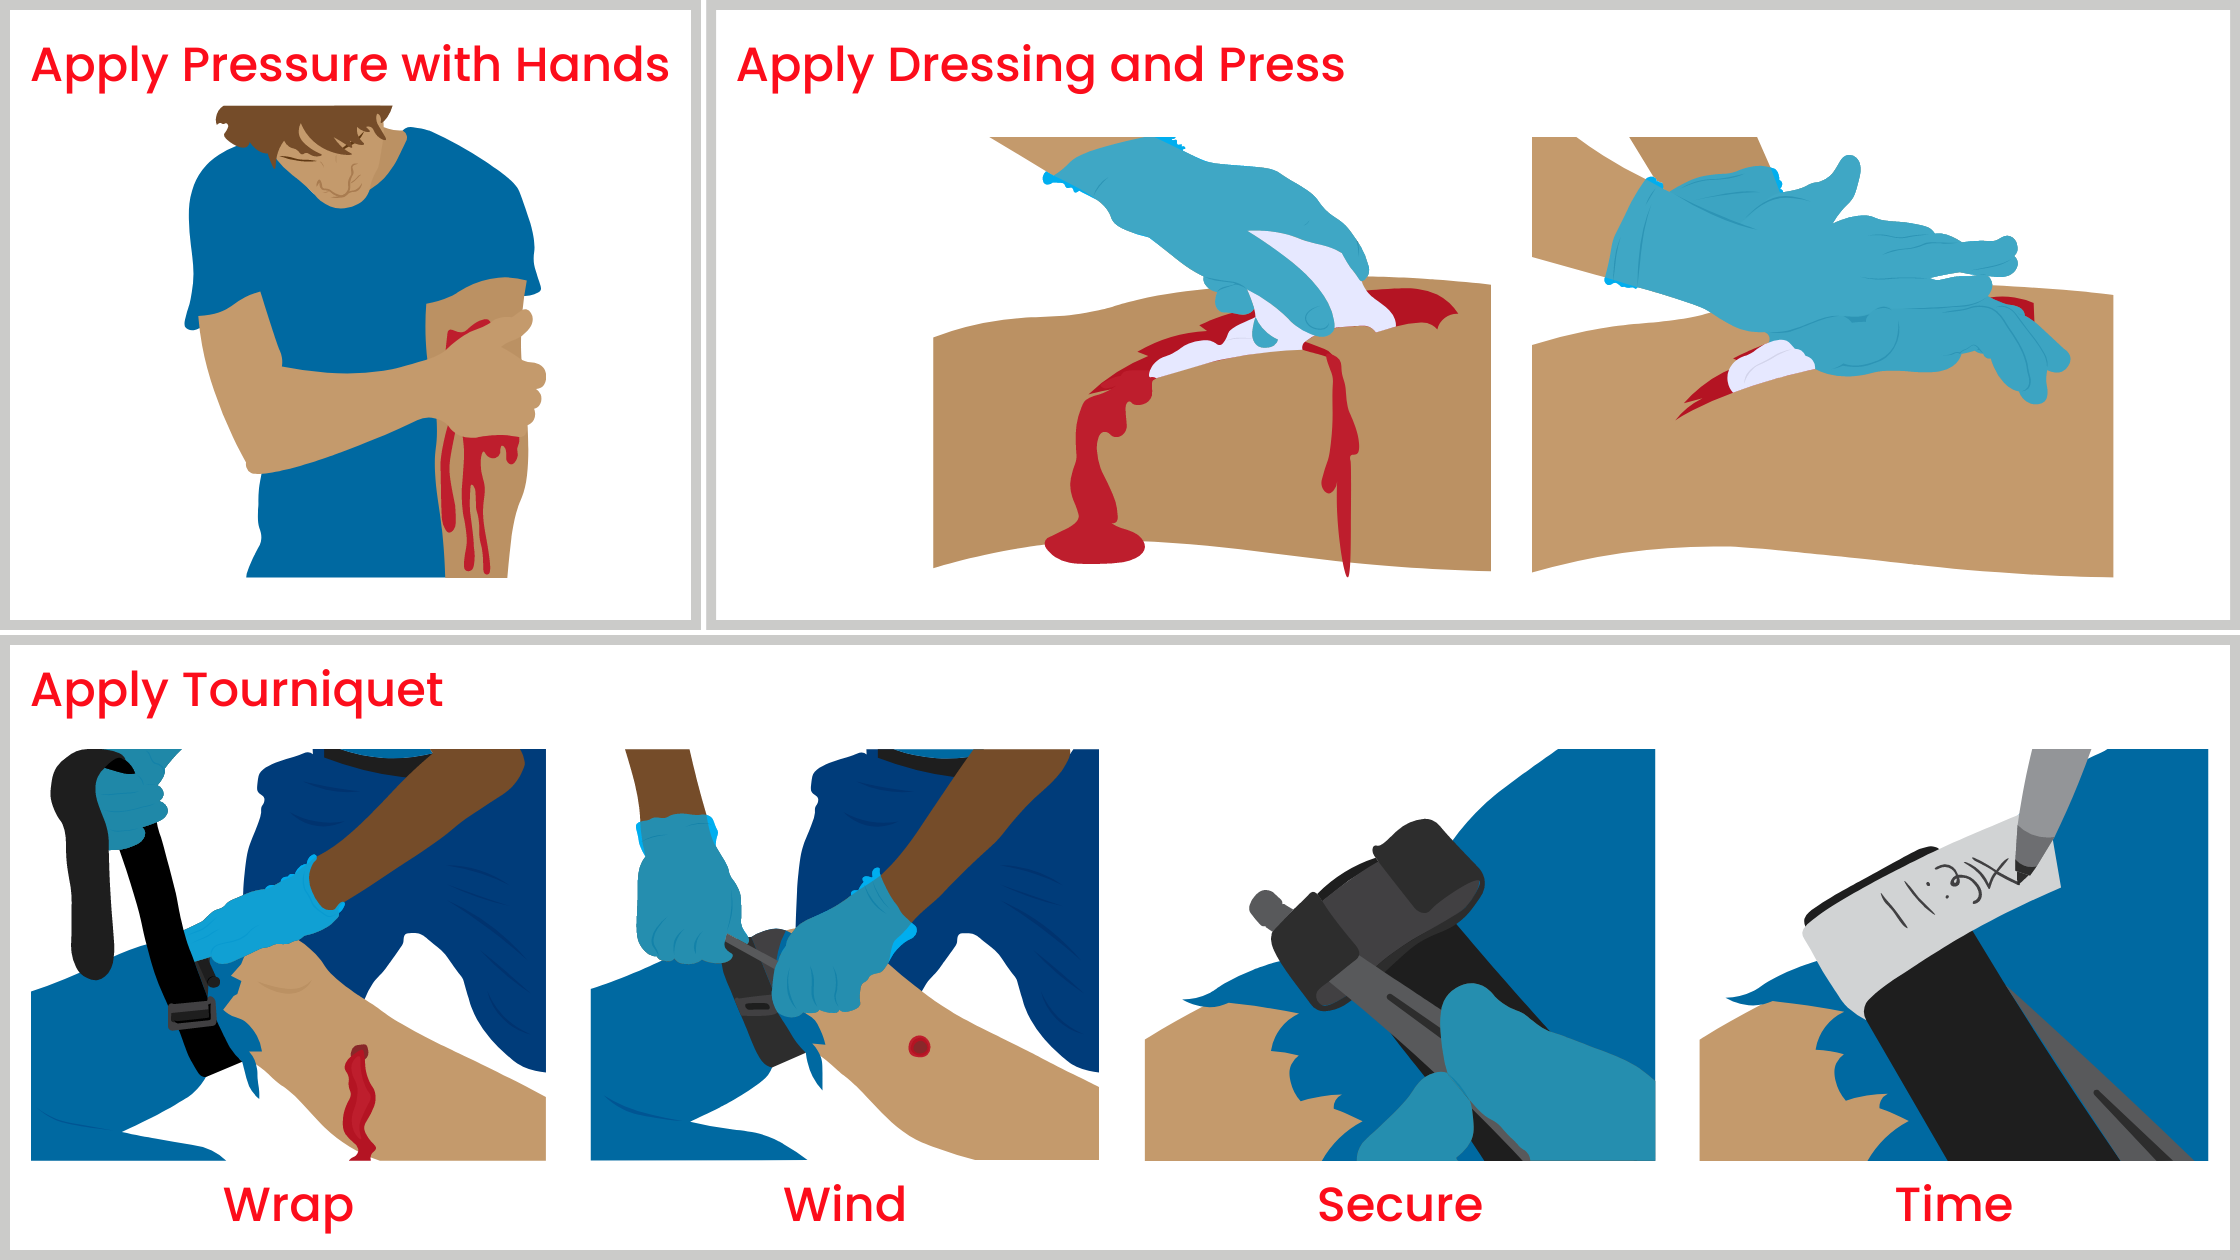 step by step illustrated directions for using a BleedStop kit:
Apply pressure with hands
Apply dressing and Press
Apply tourniquet by wrapping, winding, securing, and writing the application time